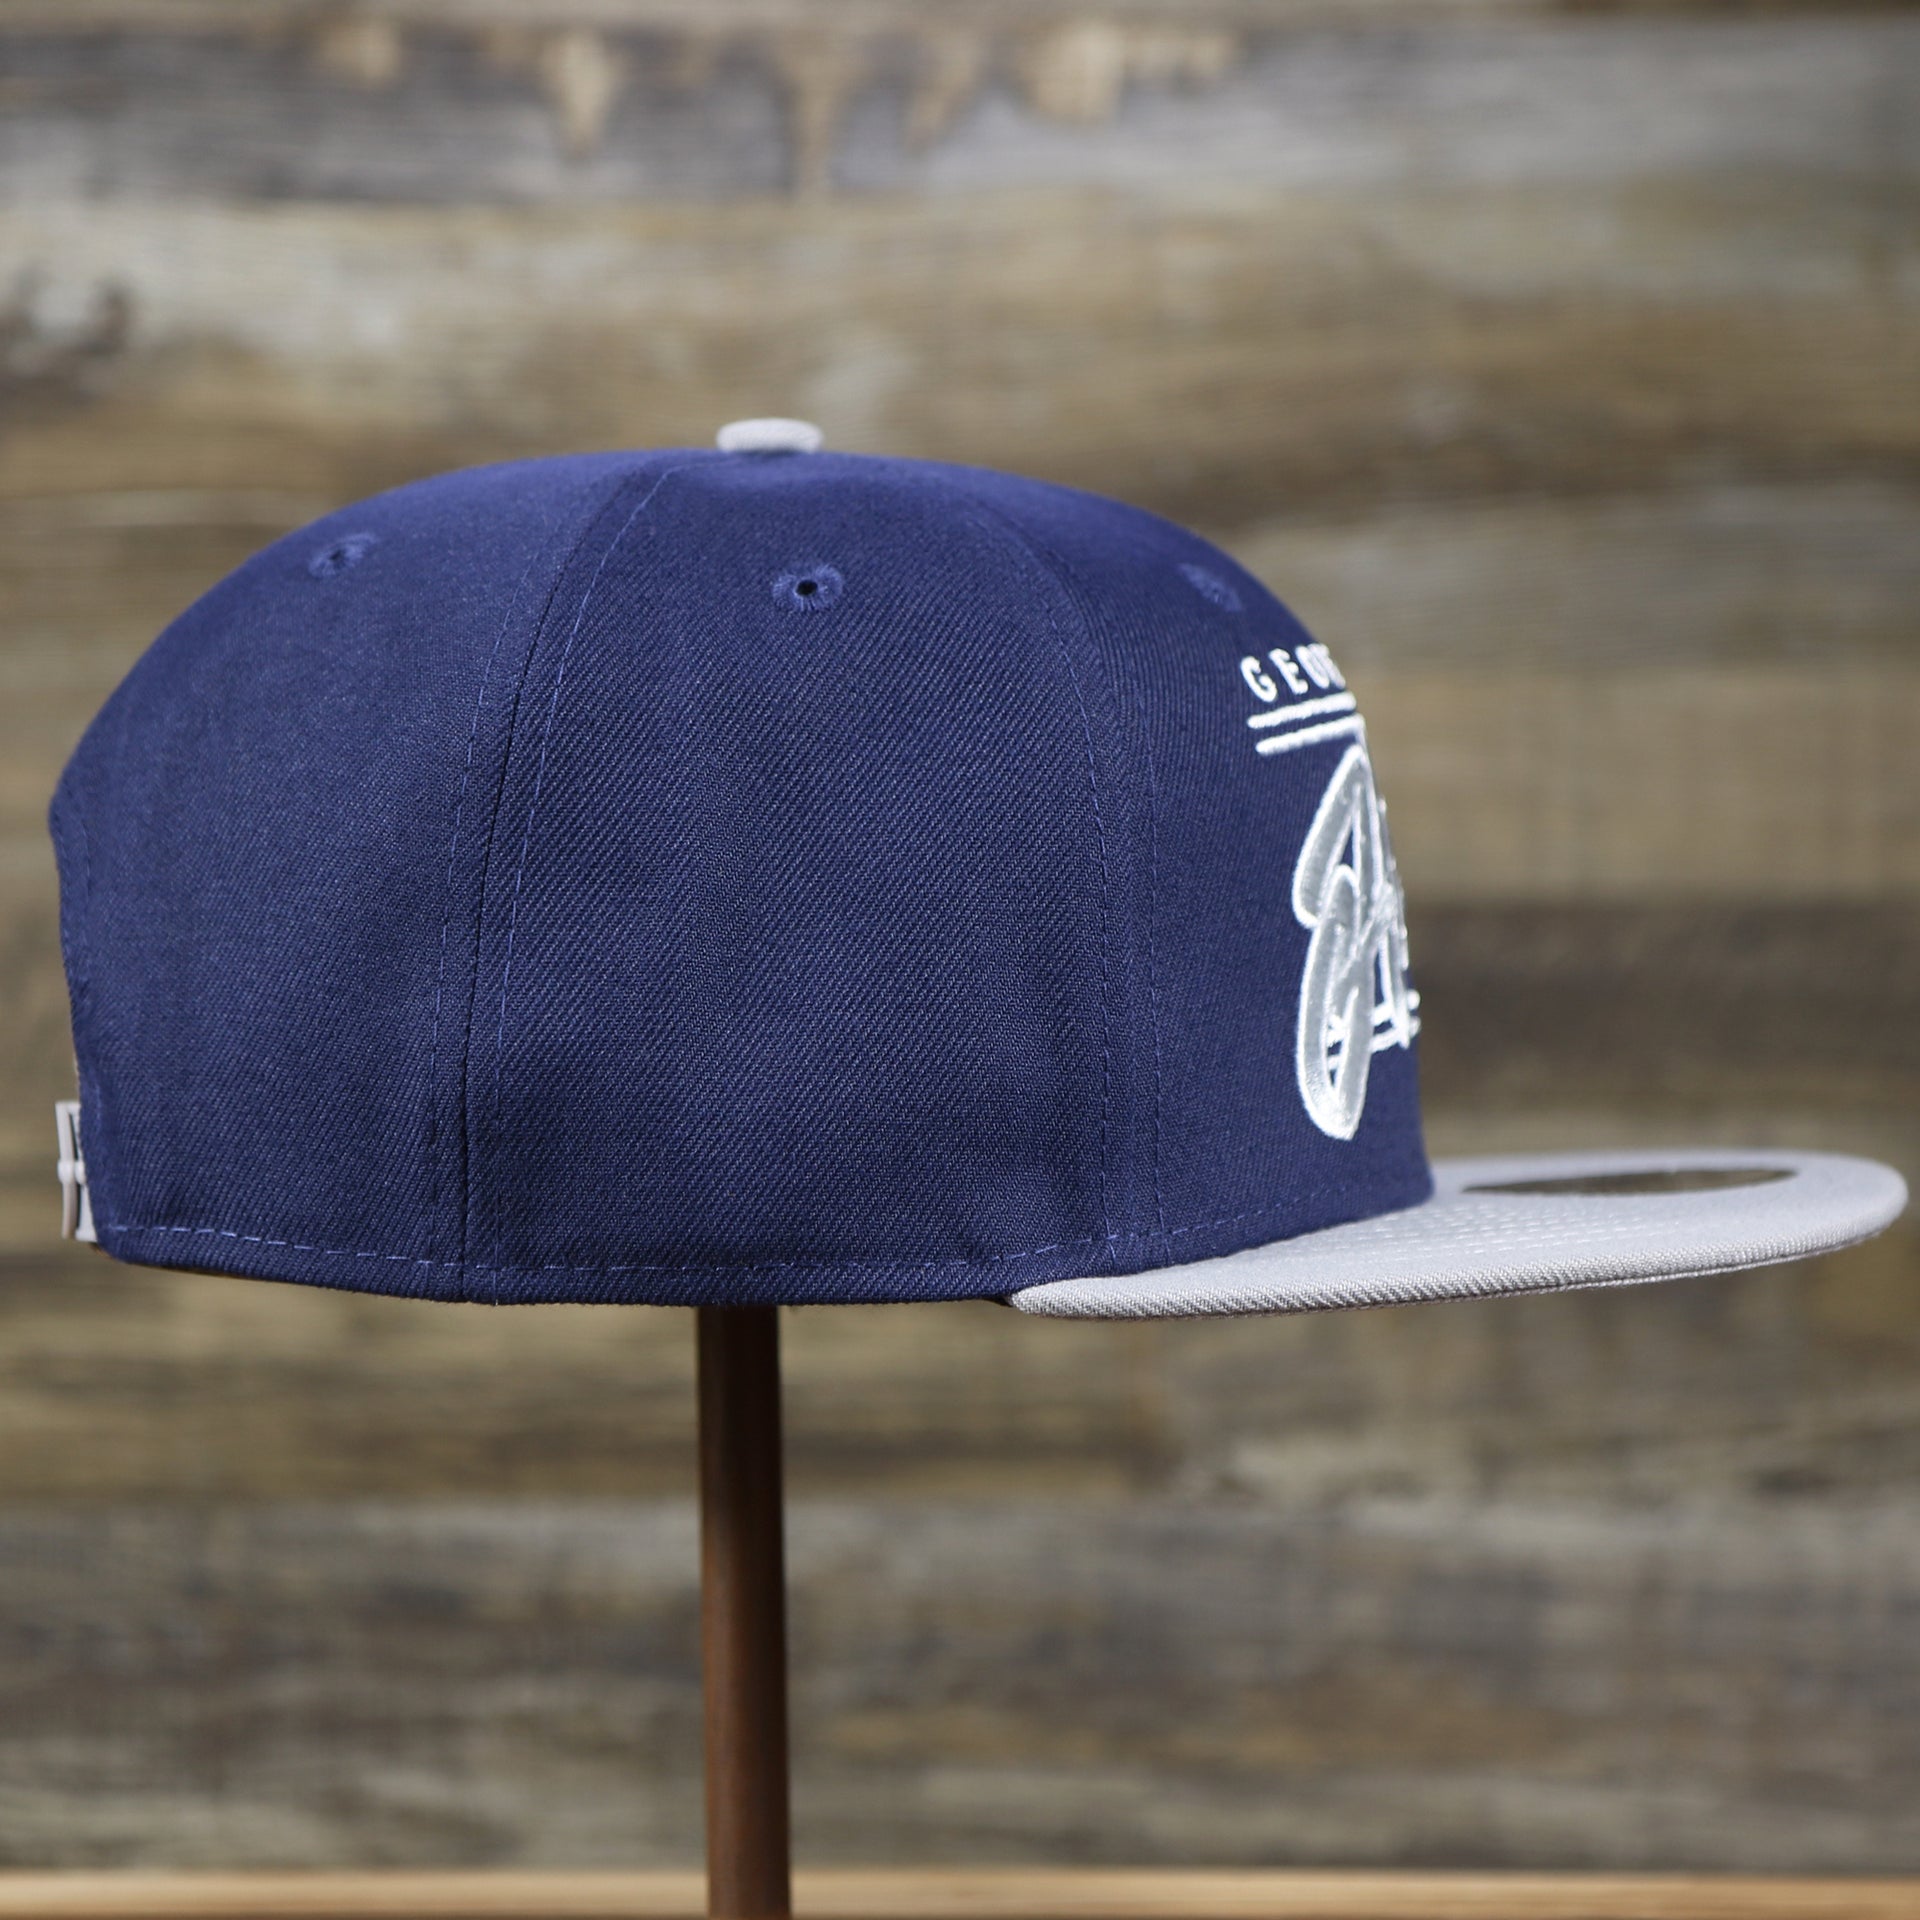 The wearer's right on the Georgetown Hoyas Team Script Gray Bottom 9Fifty Snapback | Navy Blue And Gray Snap Cap